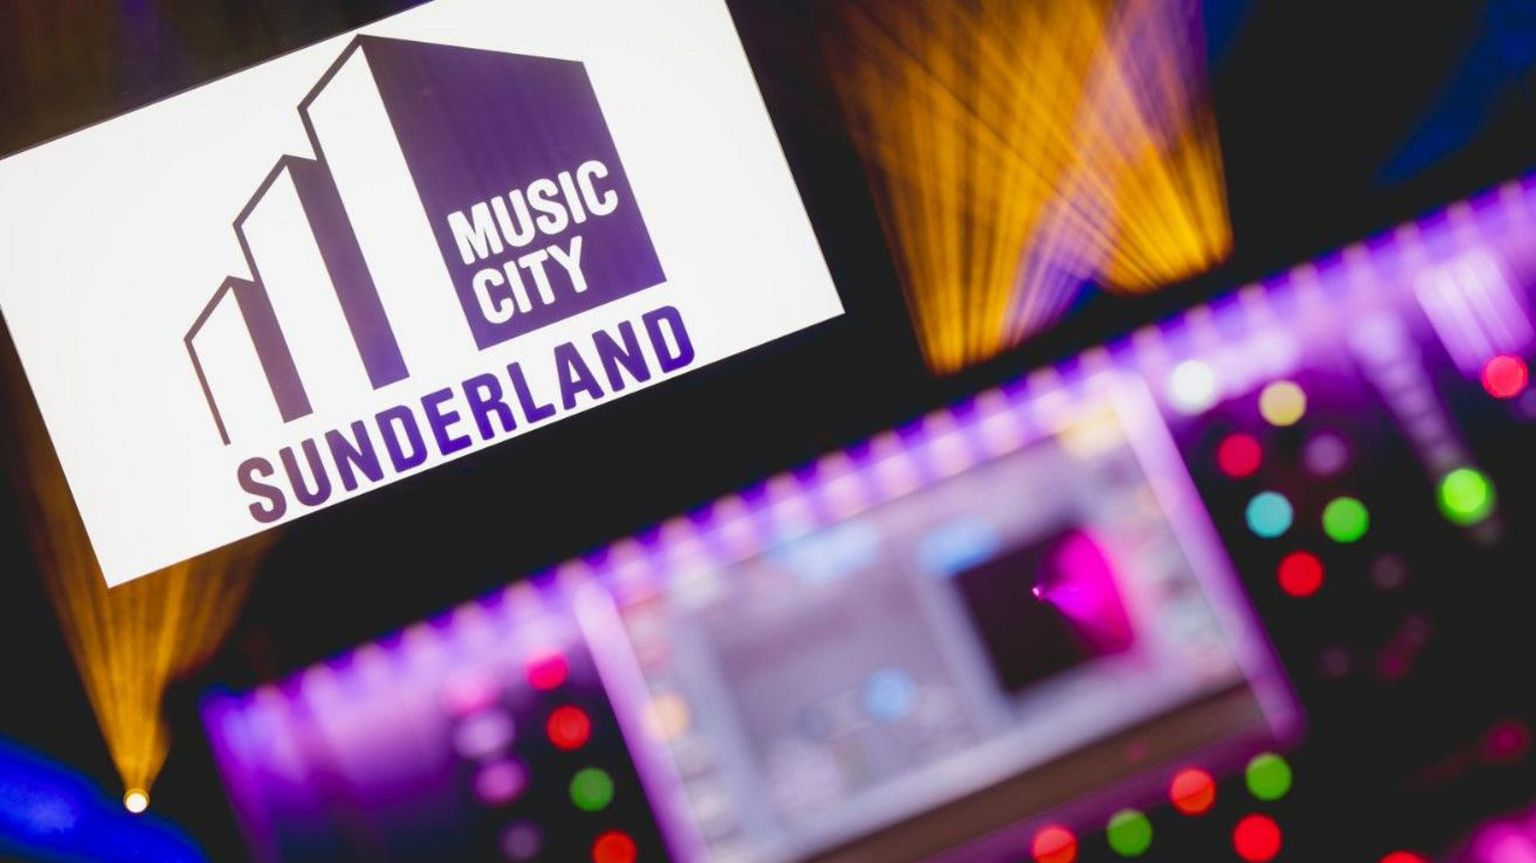 Music City Sunderland logo with a blurred DJ laptop screen in the foreground